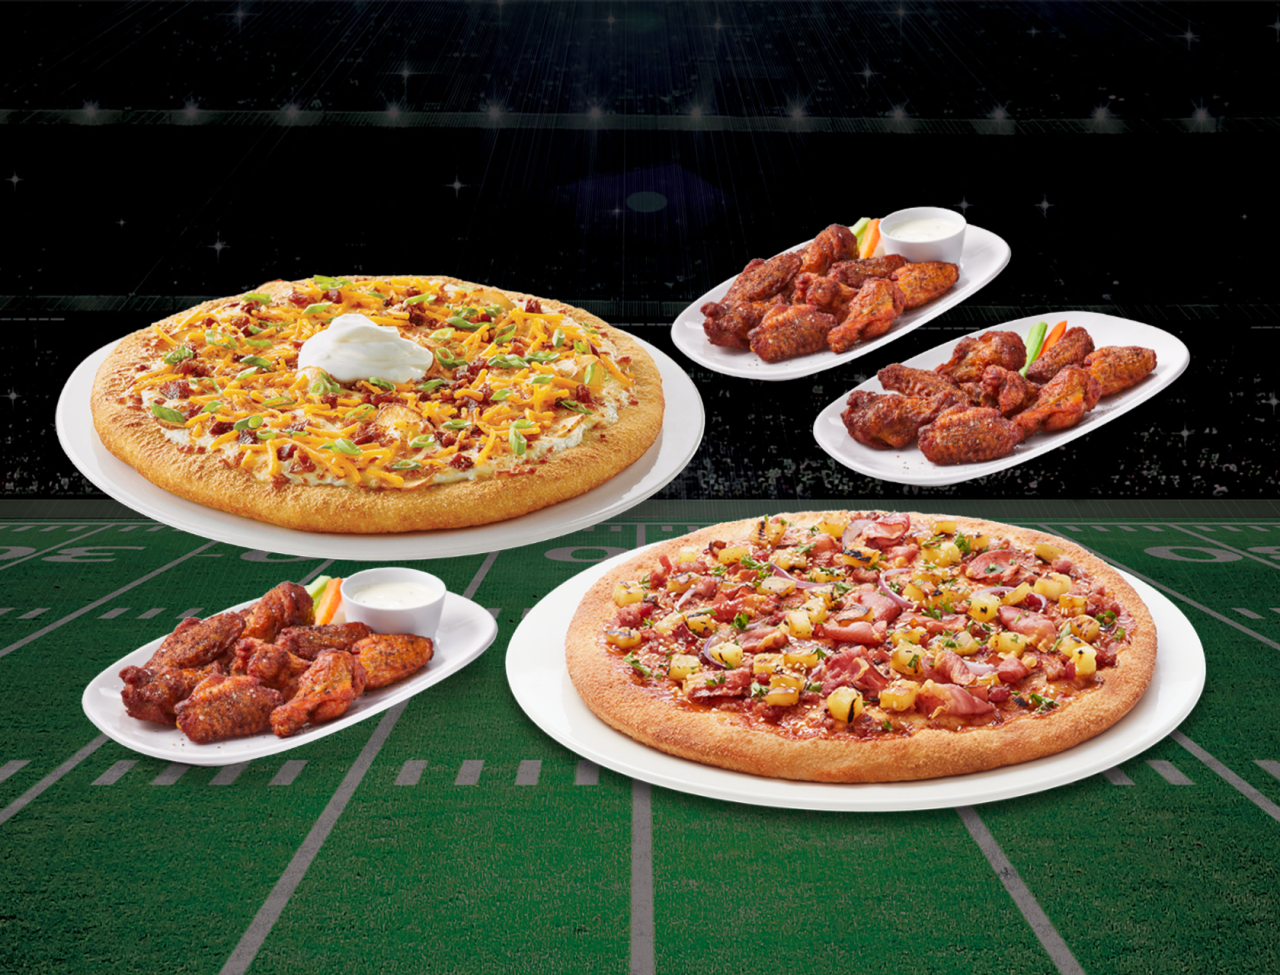 Game Day Meal Deal on football field